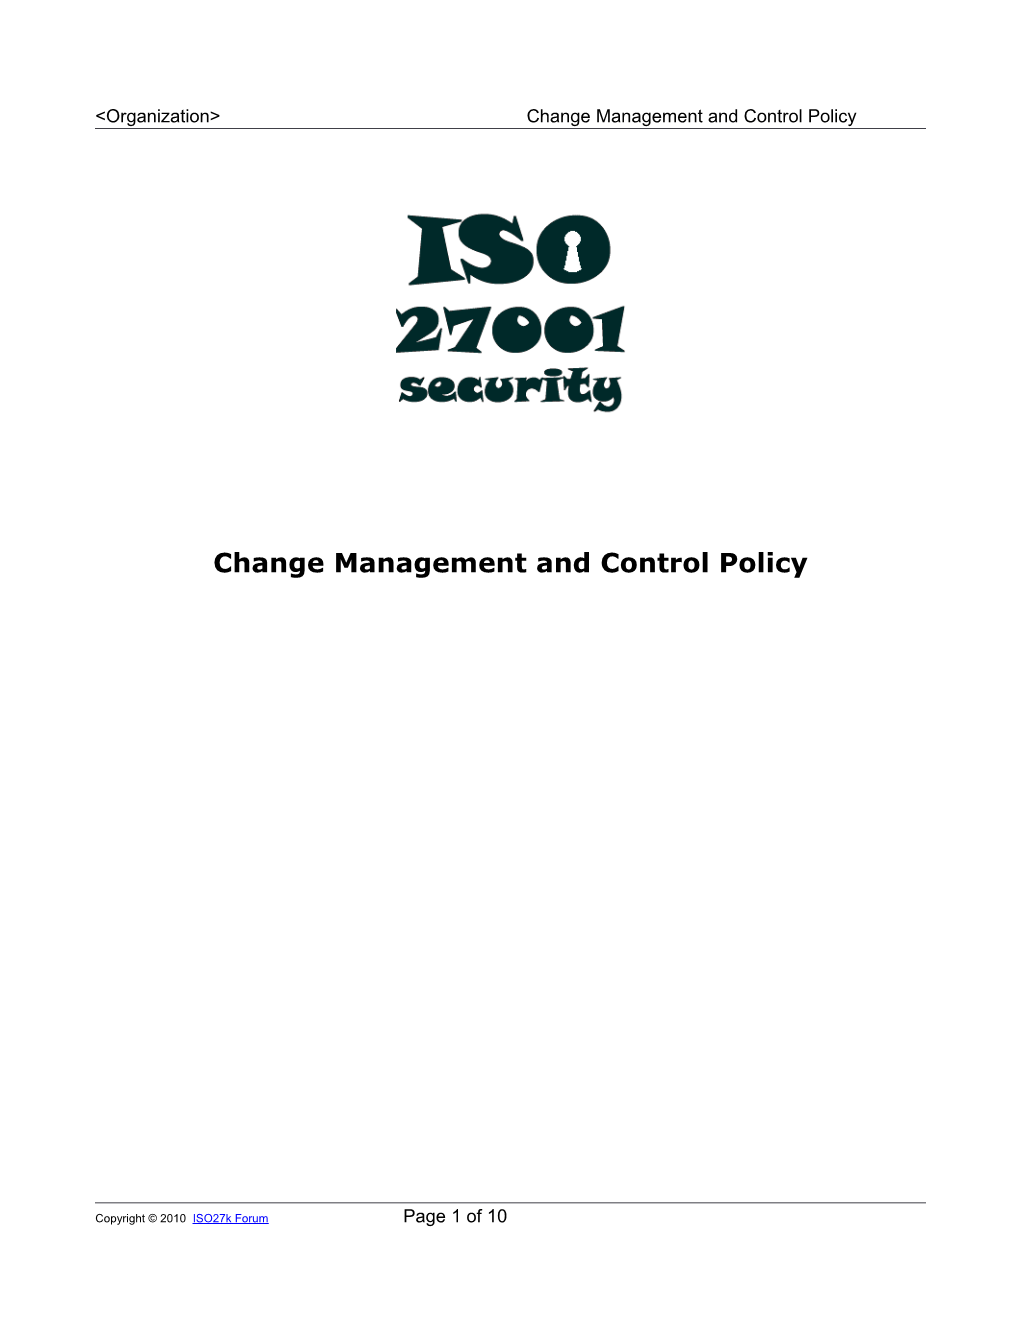 IS Change Management and Control Policy